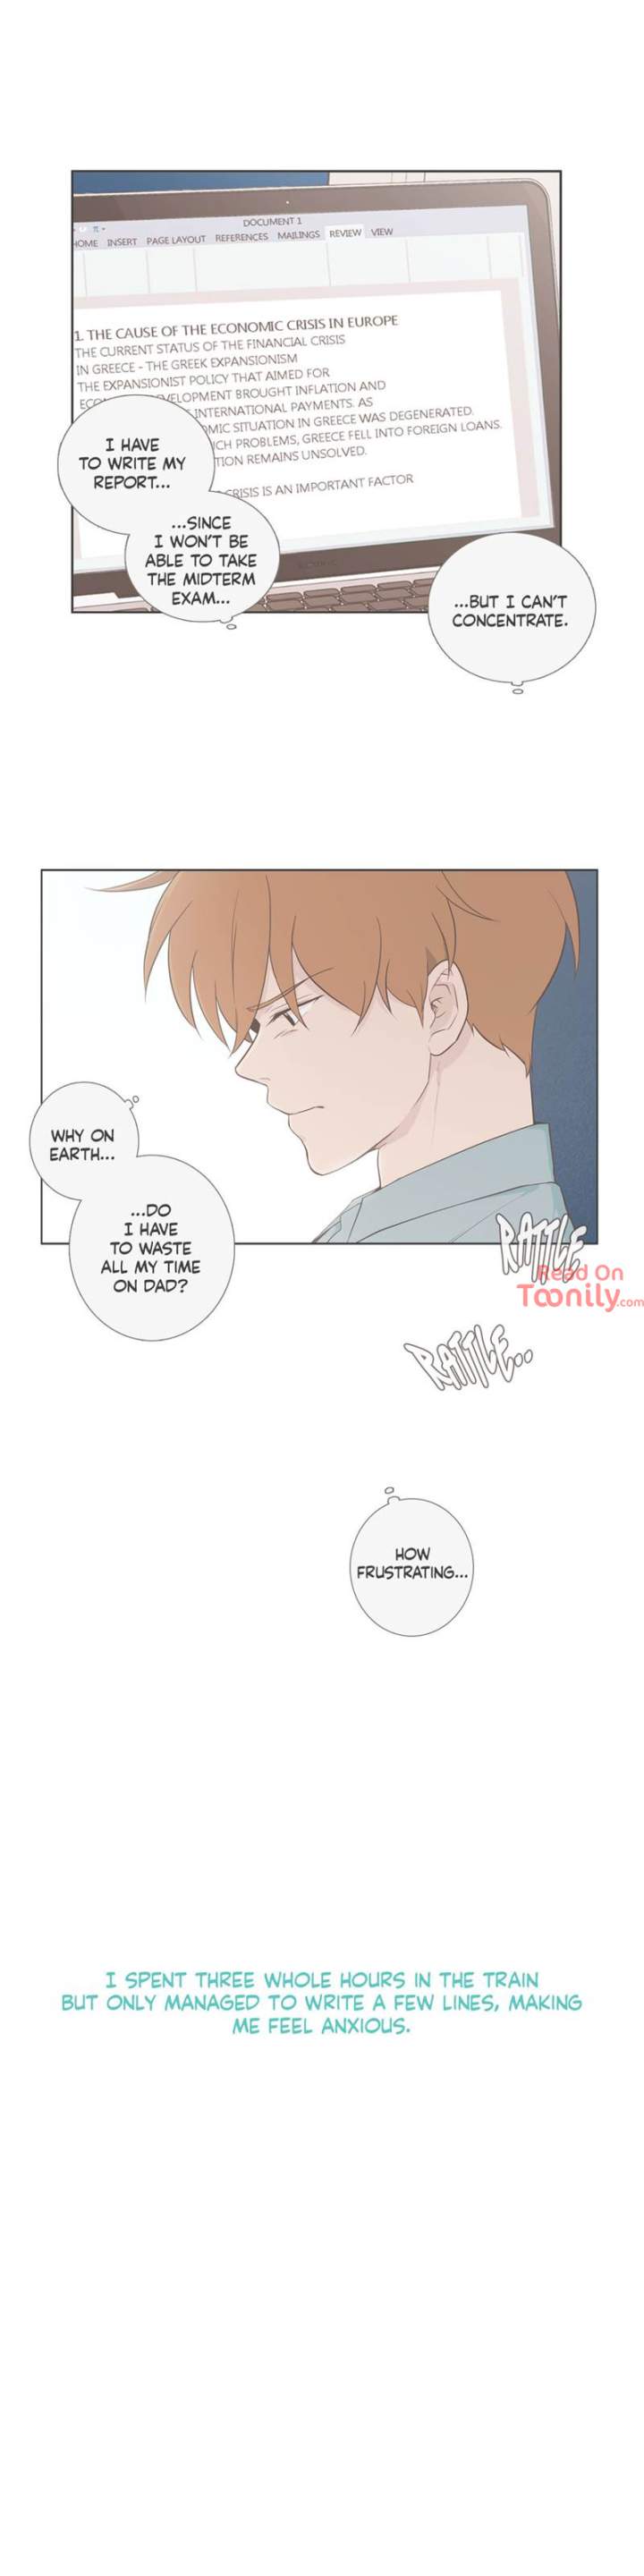 Something About Us - Chapter 86 Page 16